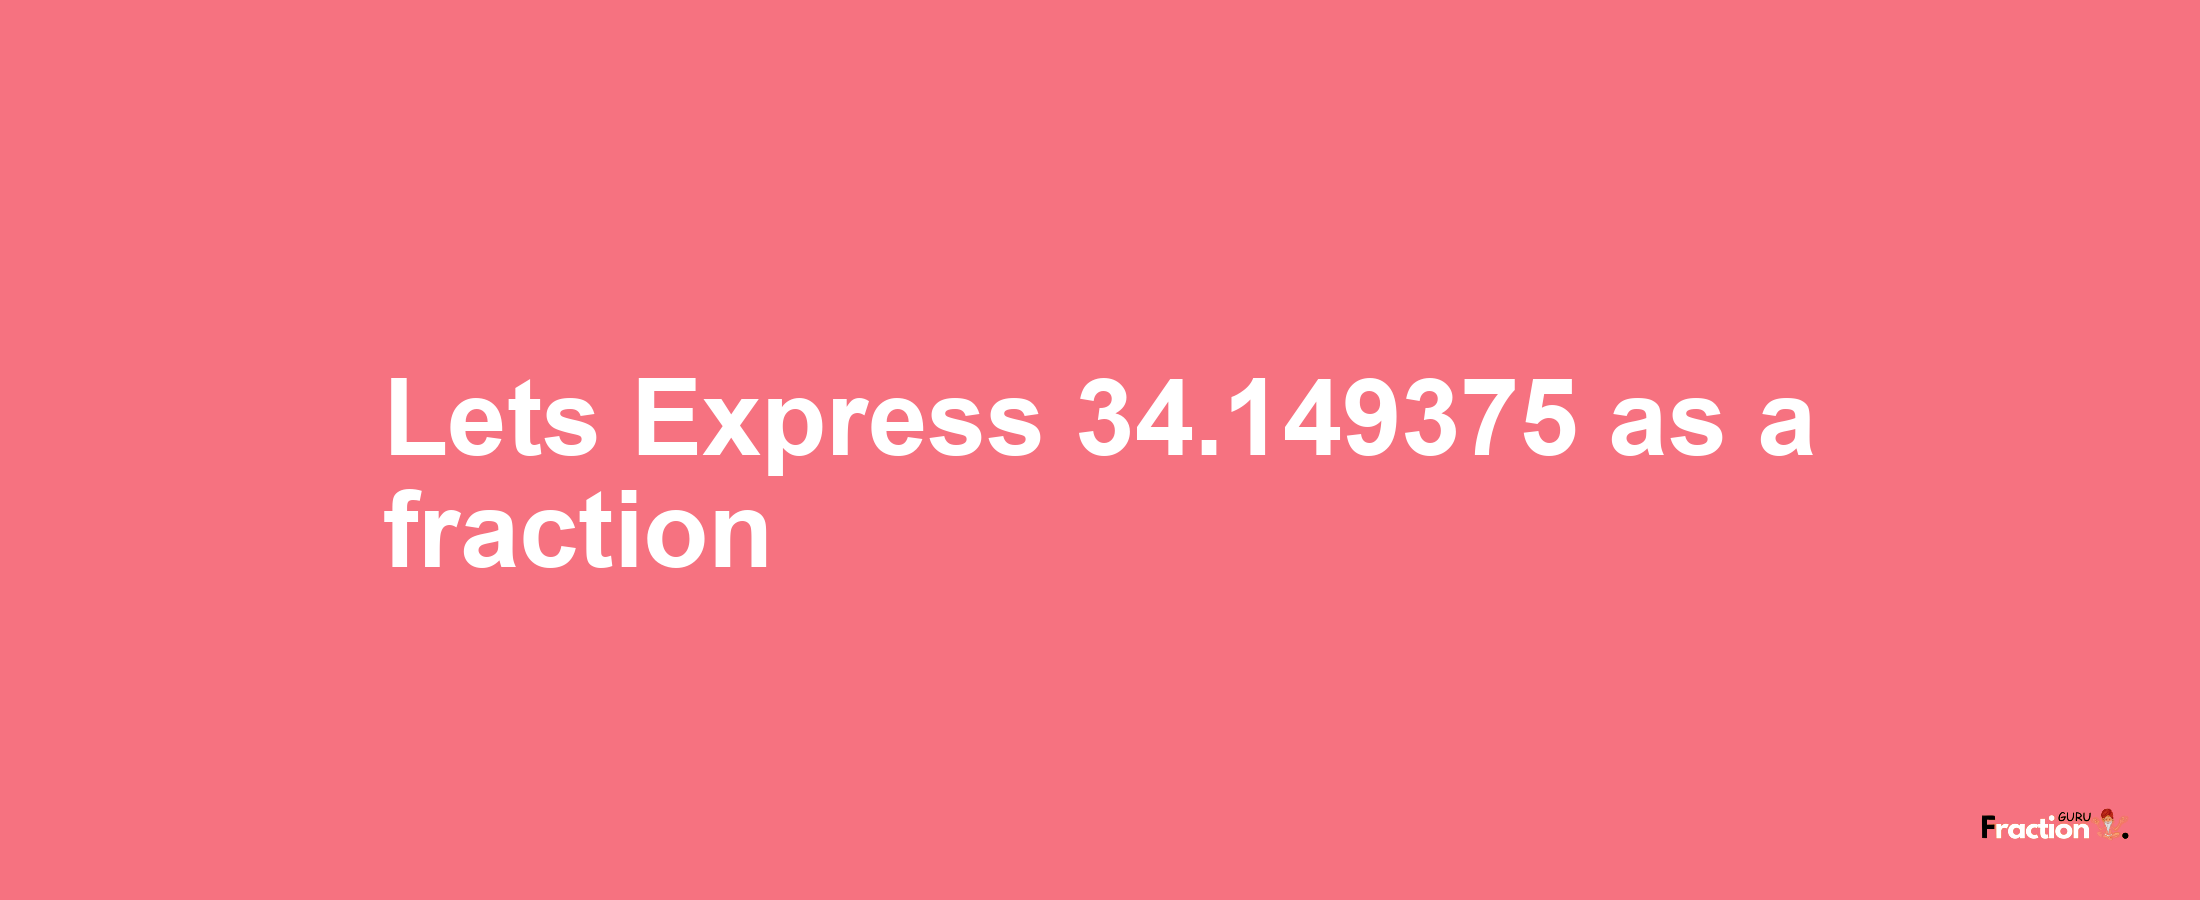 Lets Express 34.149375 as afraction